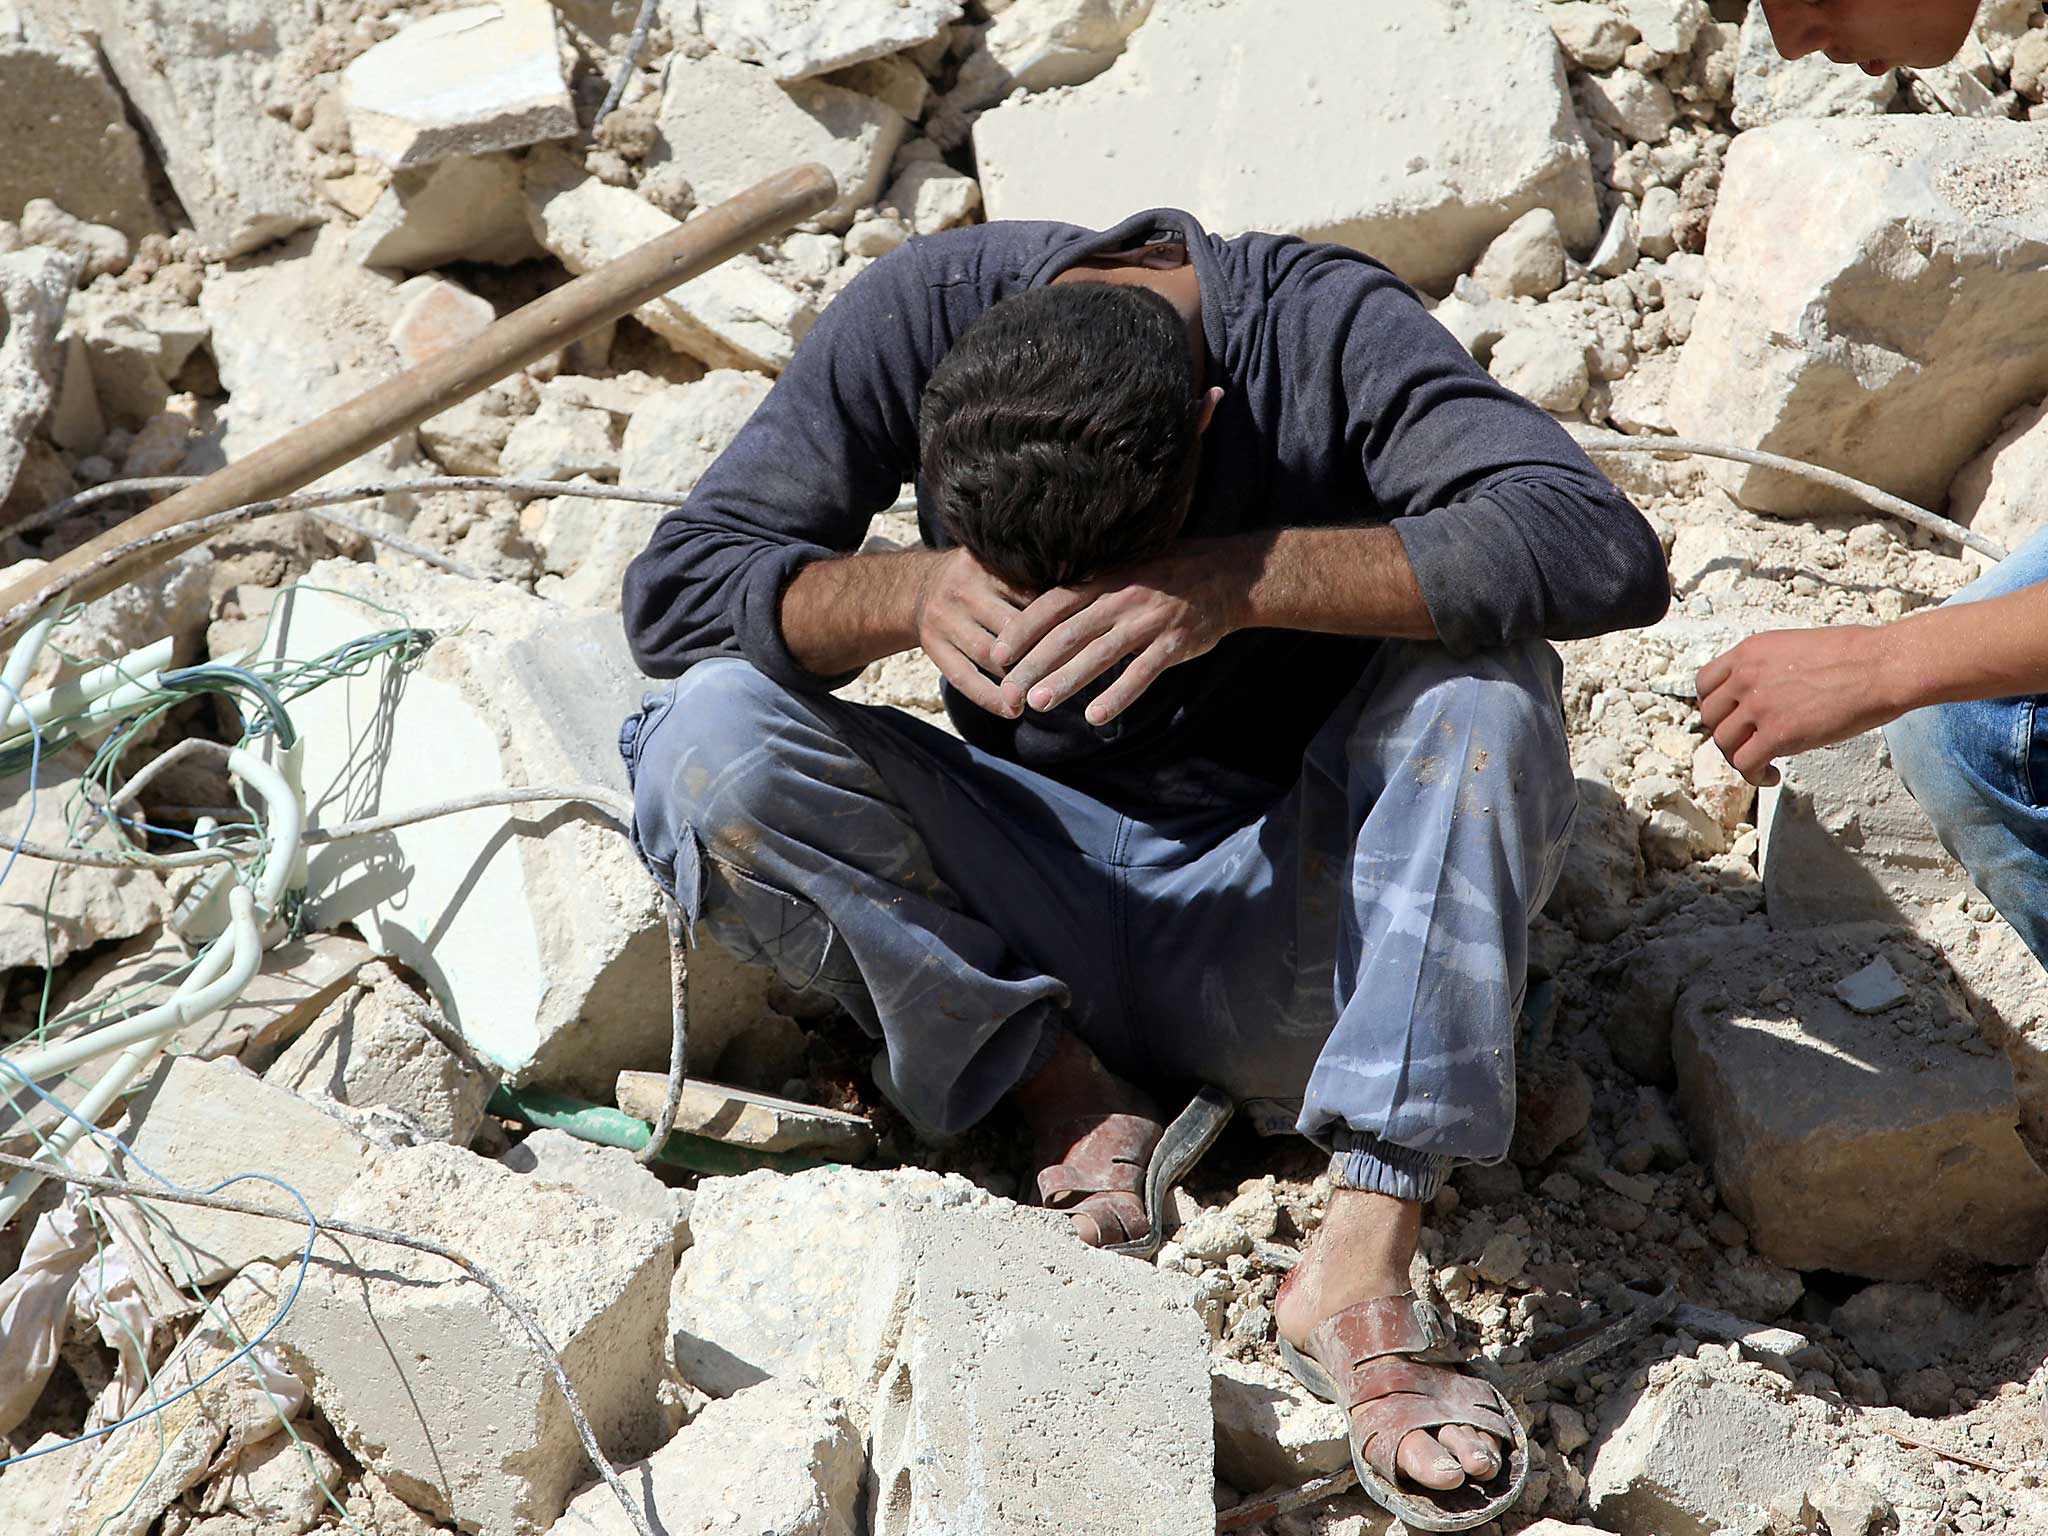 A man breaks down in tears on the rubble of damaged buildings after losing relatives to an airstrike in the besieged rebel-held al-Qaterji neighbourhood of Aleppo, Syria